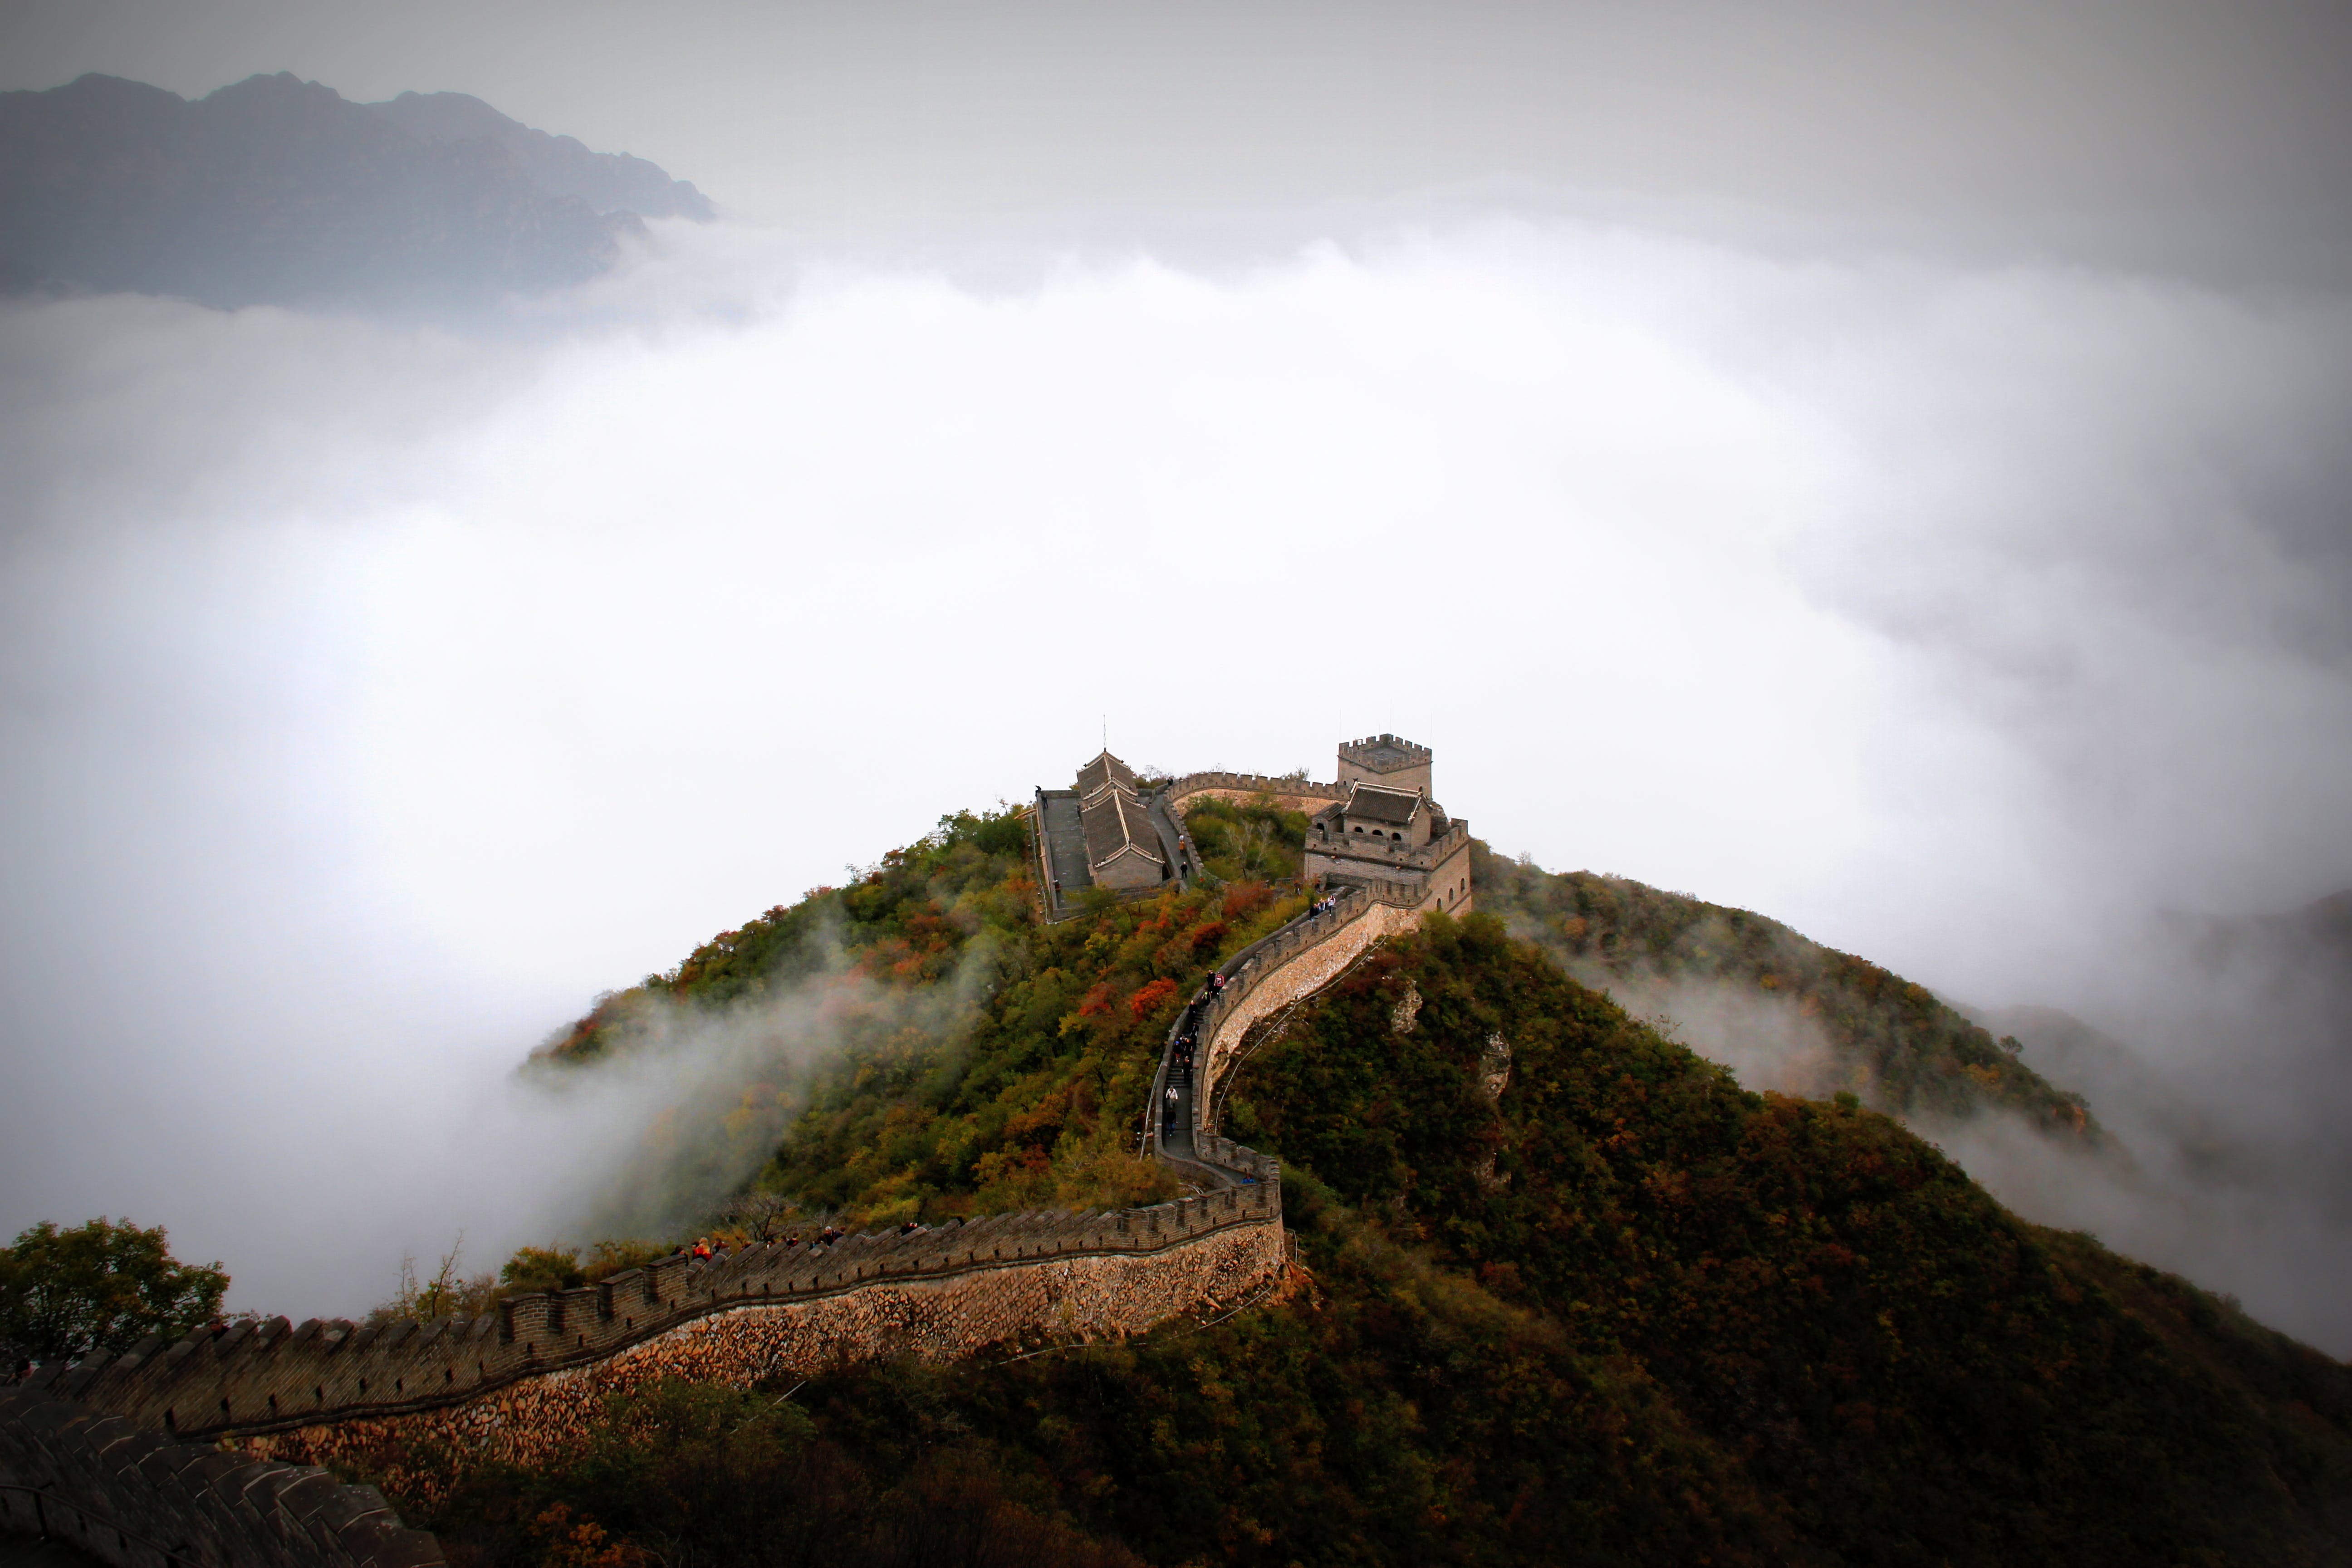 Check Out These Myths and Truths About the Great Wall of China